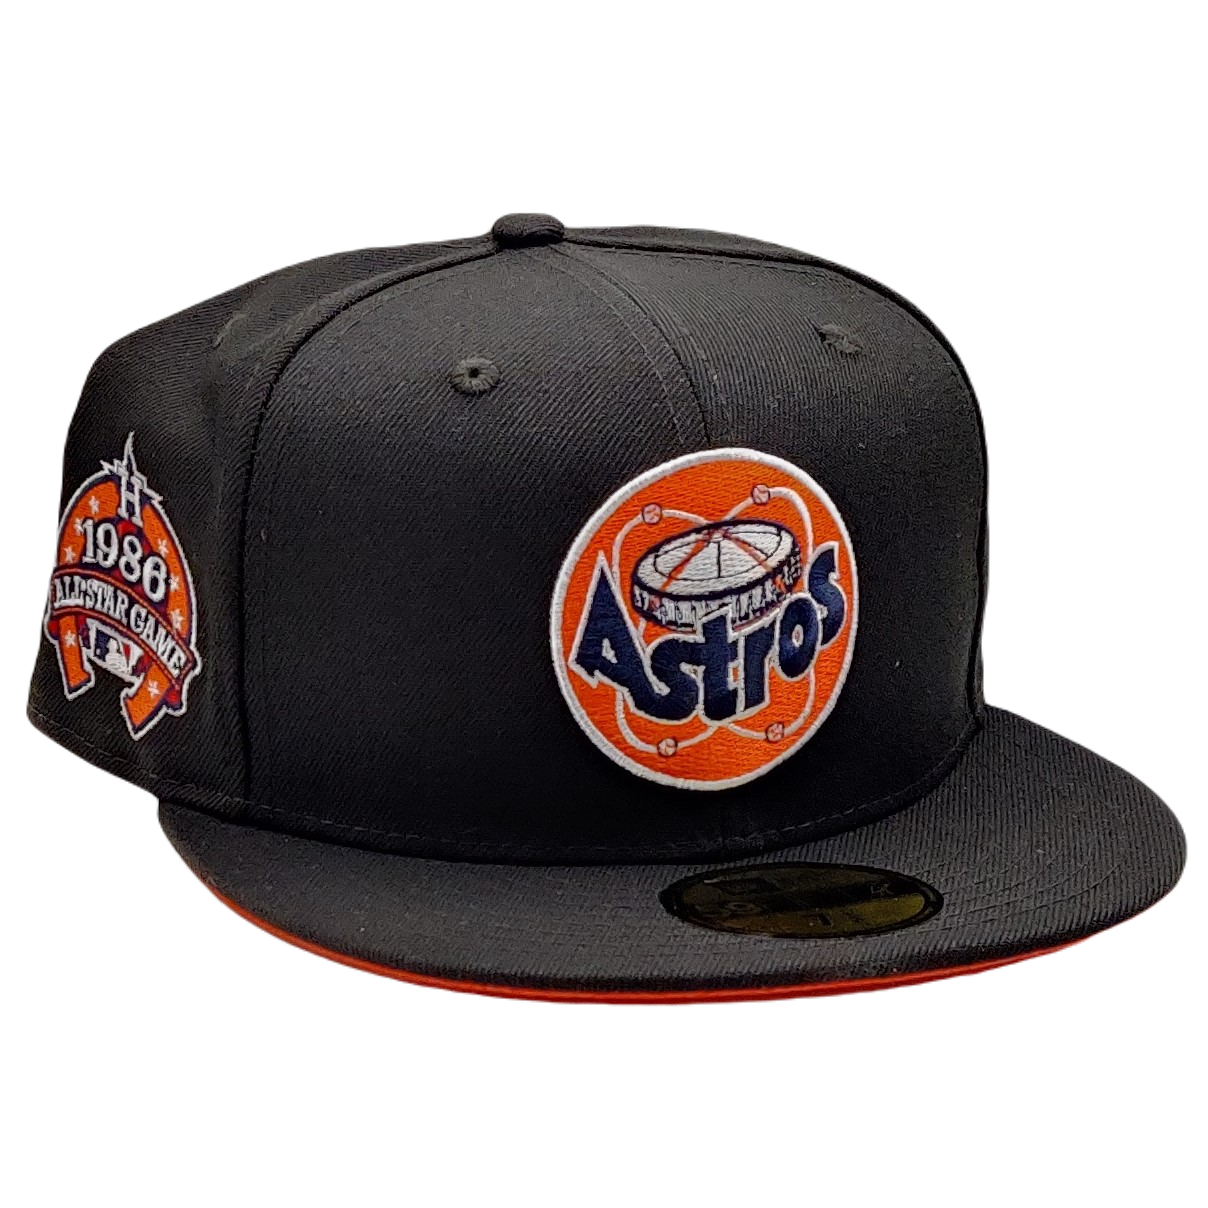 New Era Houston Astros 1986 All Star Game Capsule Hats Exclusive 59Fifty Fitted Hat Grey/Orange